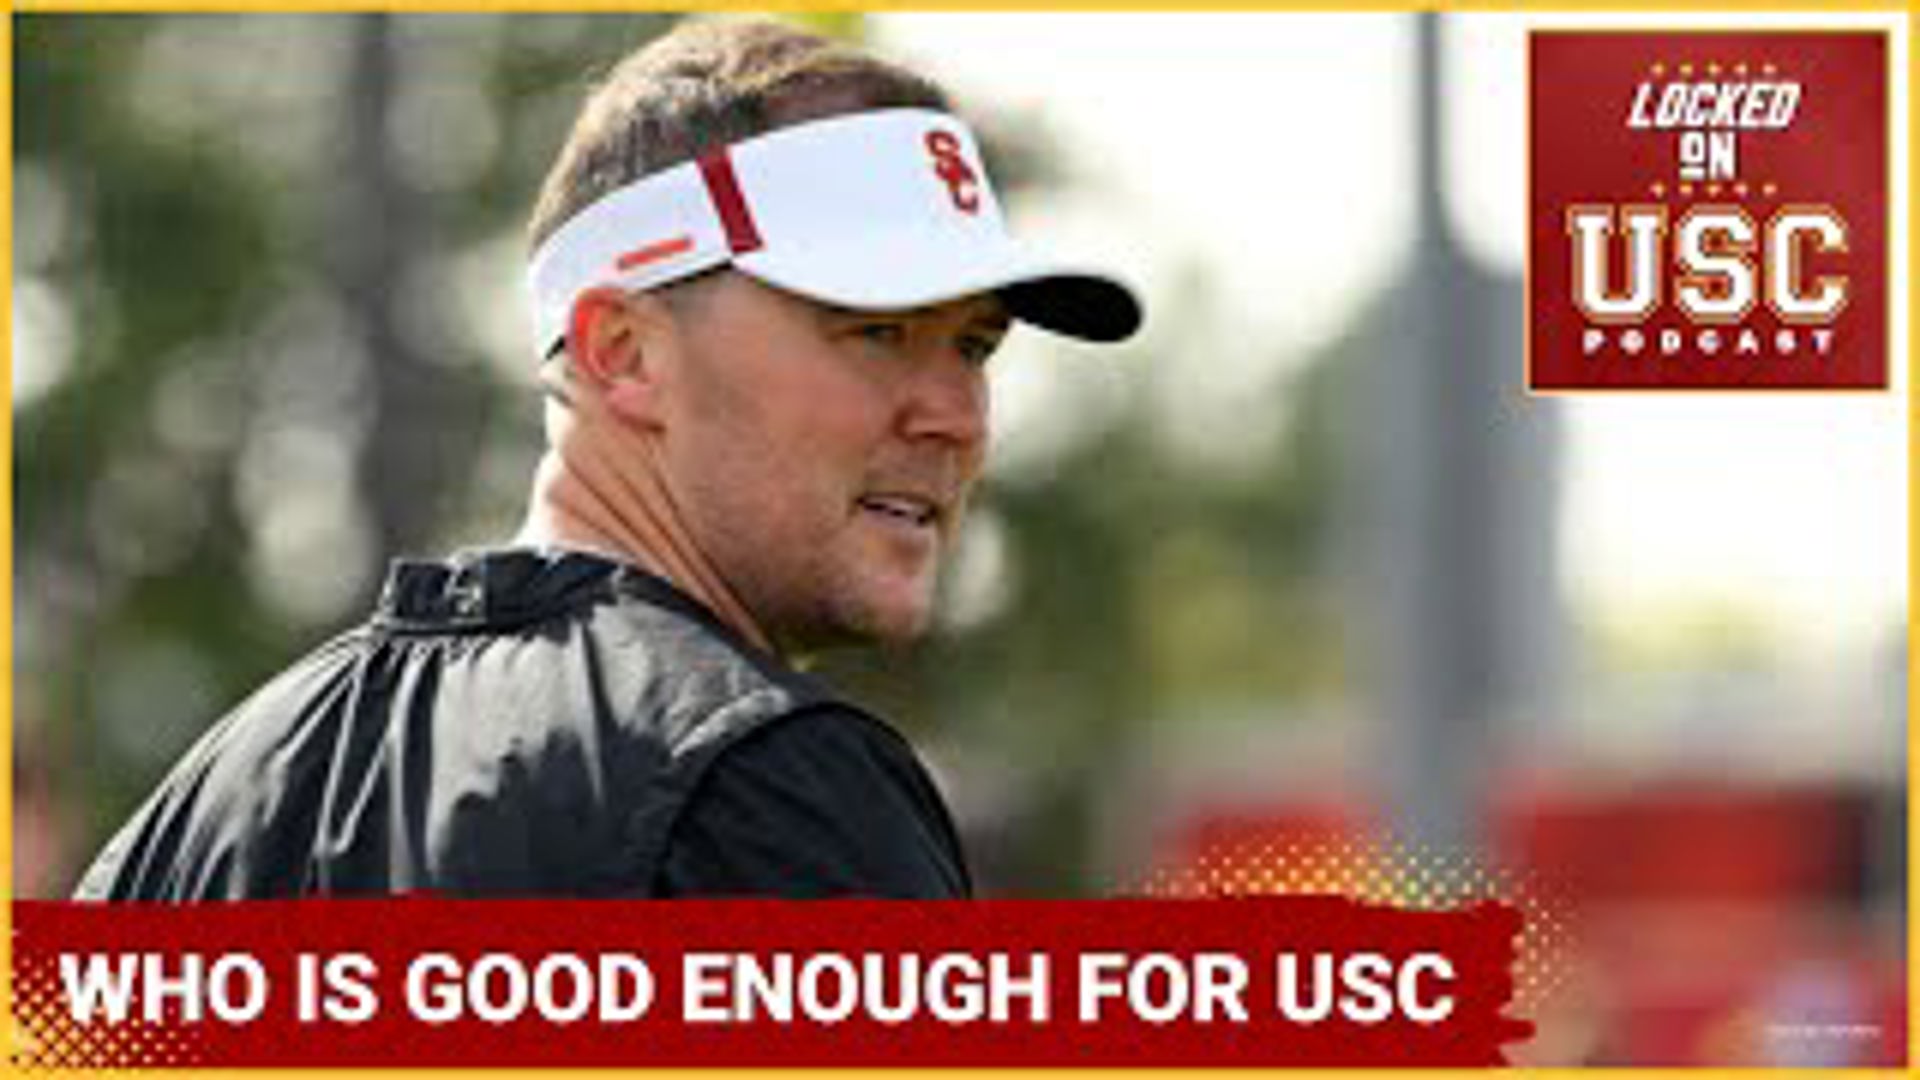 USC is still looking to find some specific needs to fill out of the transfer portal. During this episode's first segment, I explain who is still left.